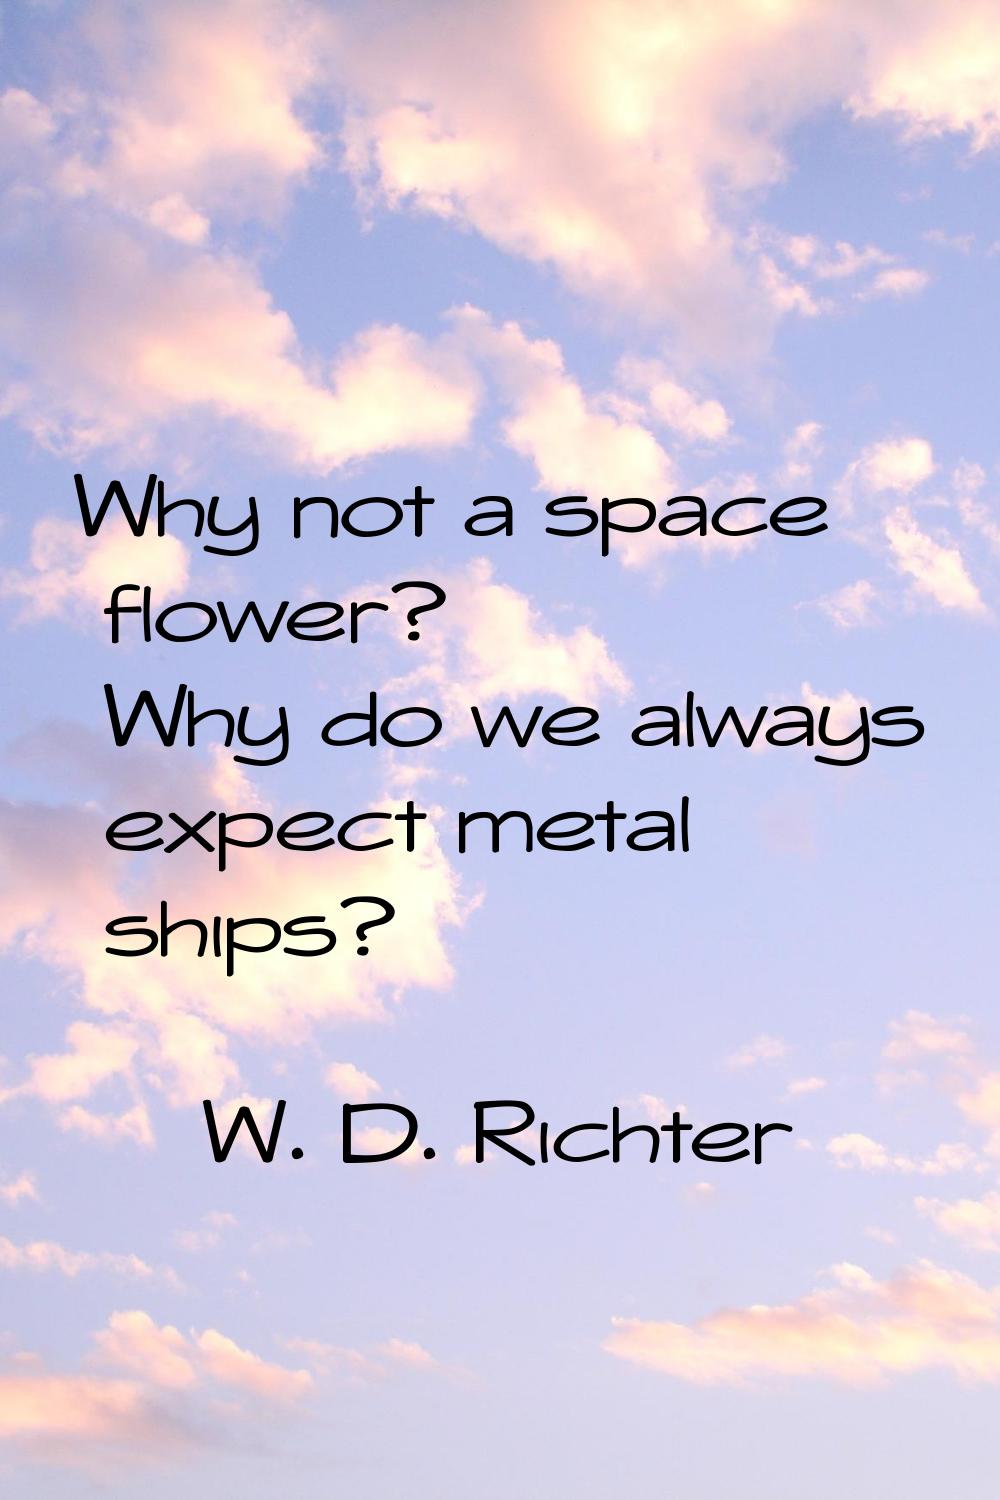 Why not a space flower? Why do we always expect metal ships?